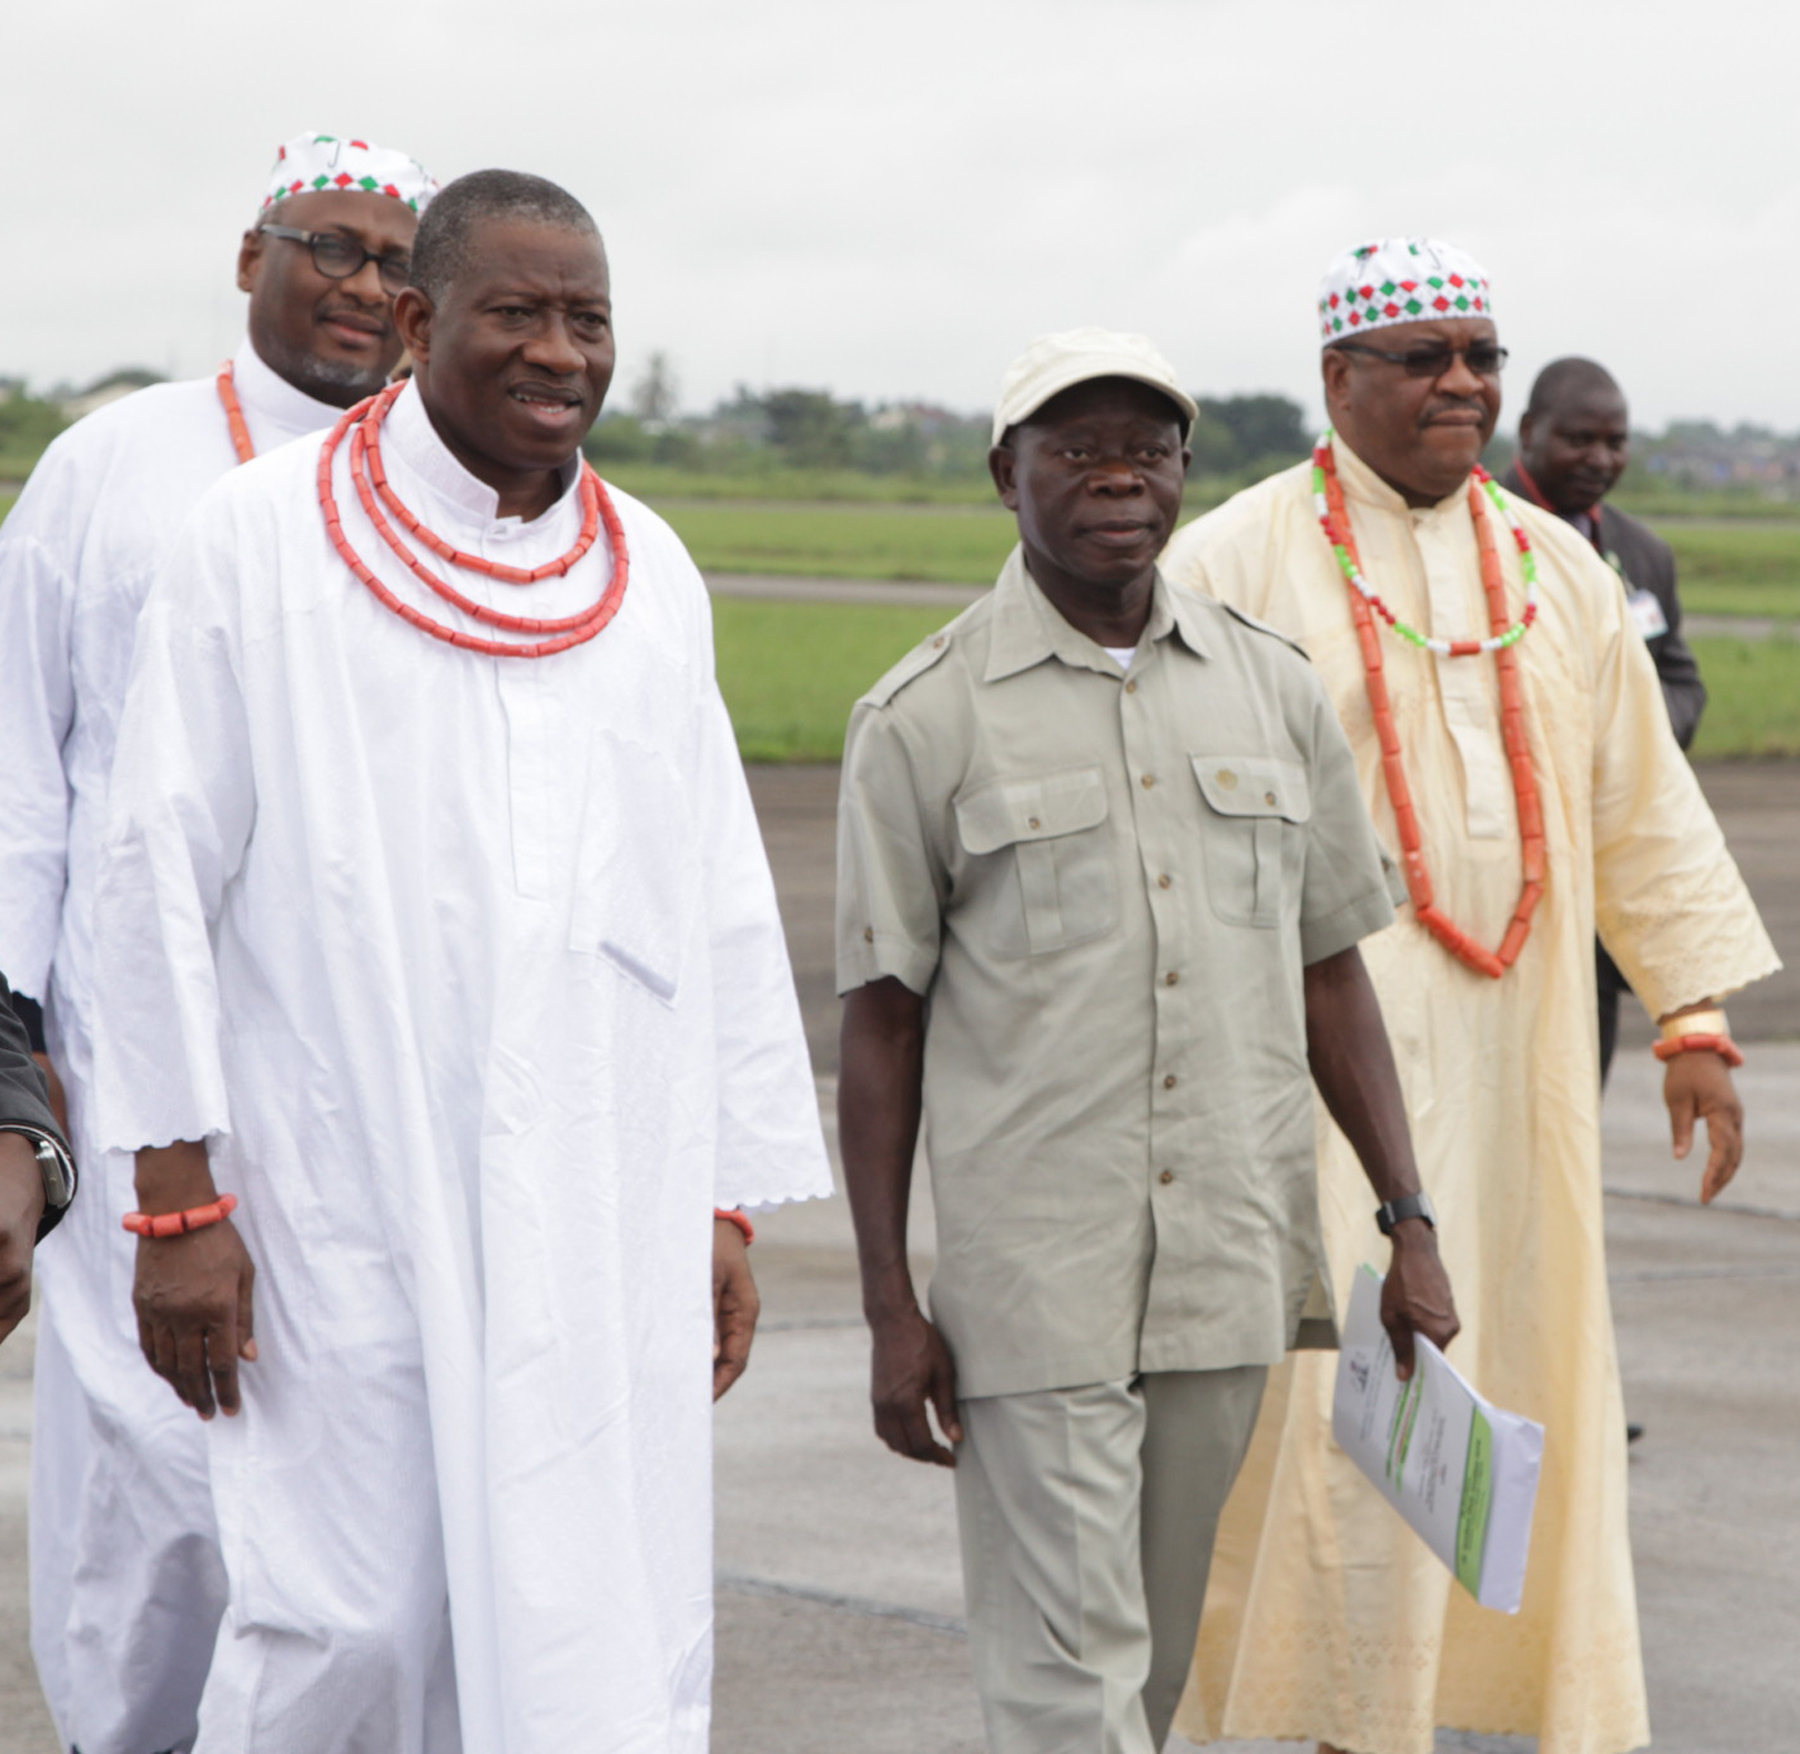 From left: President Goodluck Jonathan, APC Presidential aspirant and Governor of Edo State, Comrade Adams Oshiomhole and Chief Mike Onolemenmen, Minister of Works on arrival of the President at the Benin Airport for a party rally, yesterday.